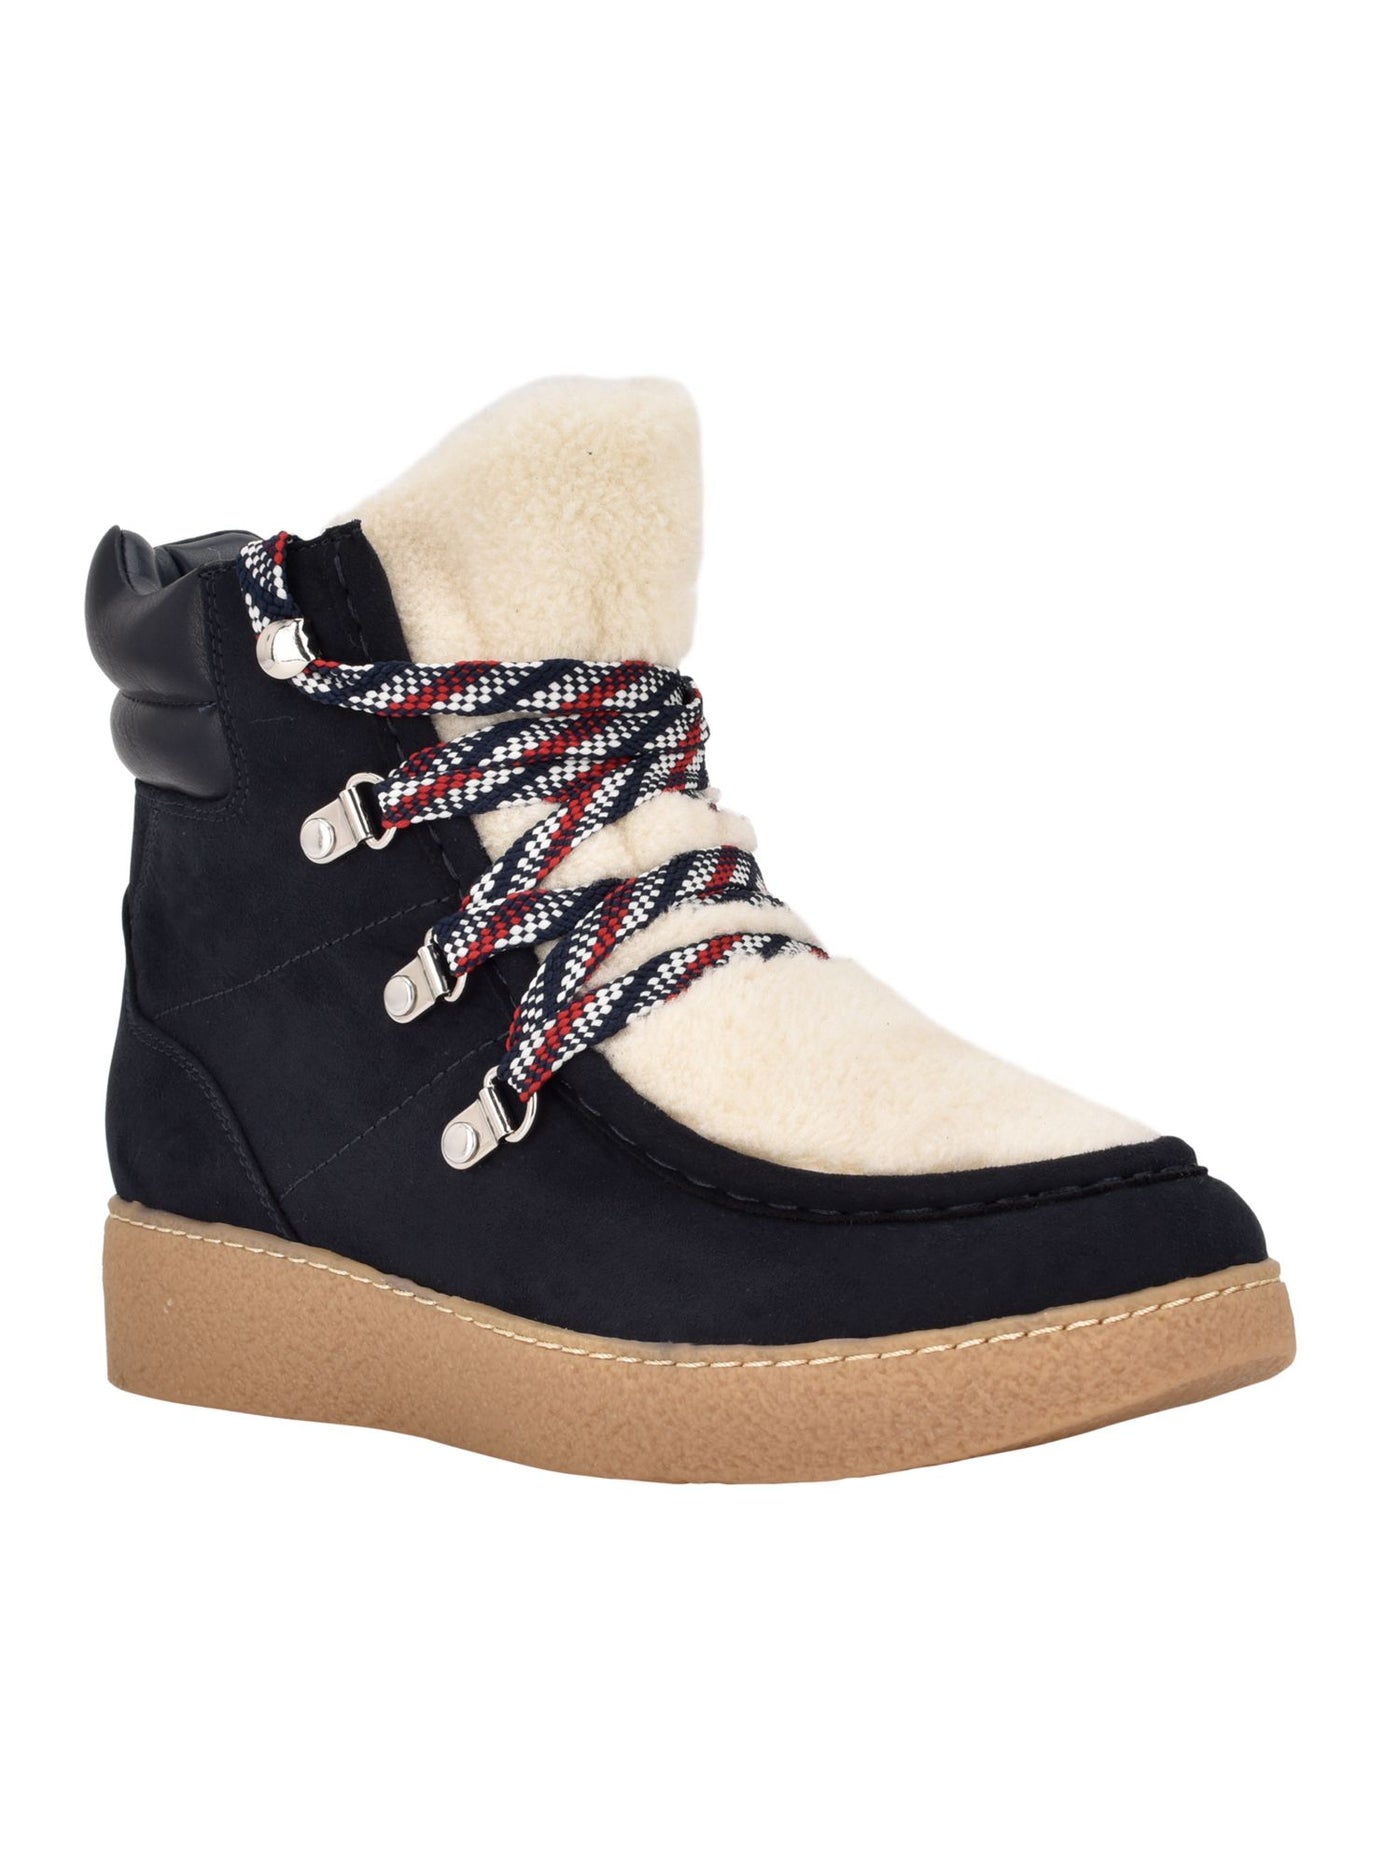 TOMMY HILFIGER Womens Navy Color Block 1 Platform Padded Riko 2 Round Toe Wedge Lace-Up Winter 10 M